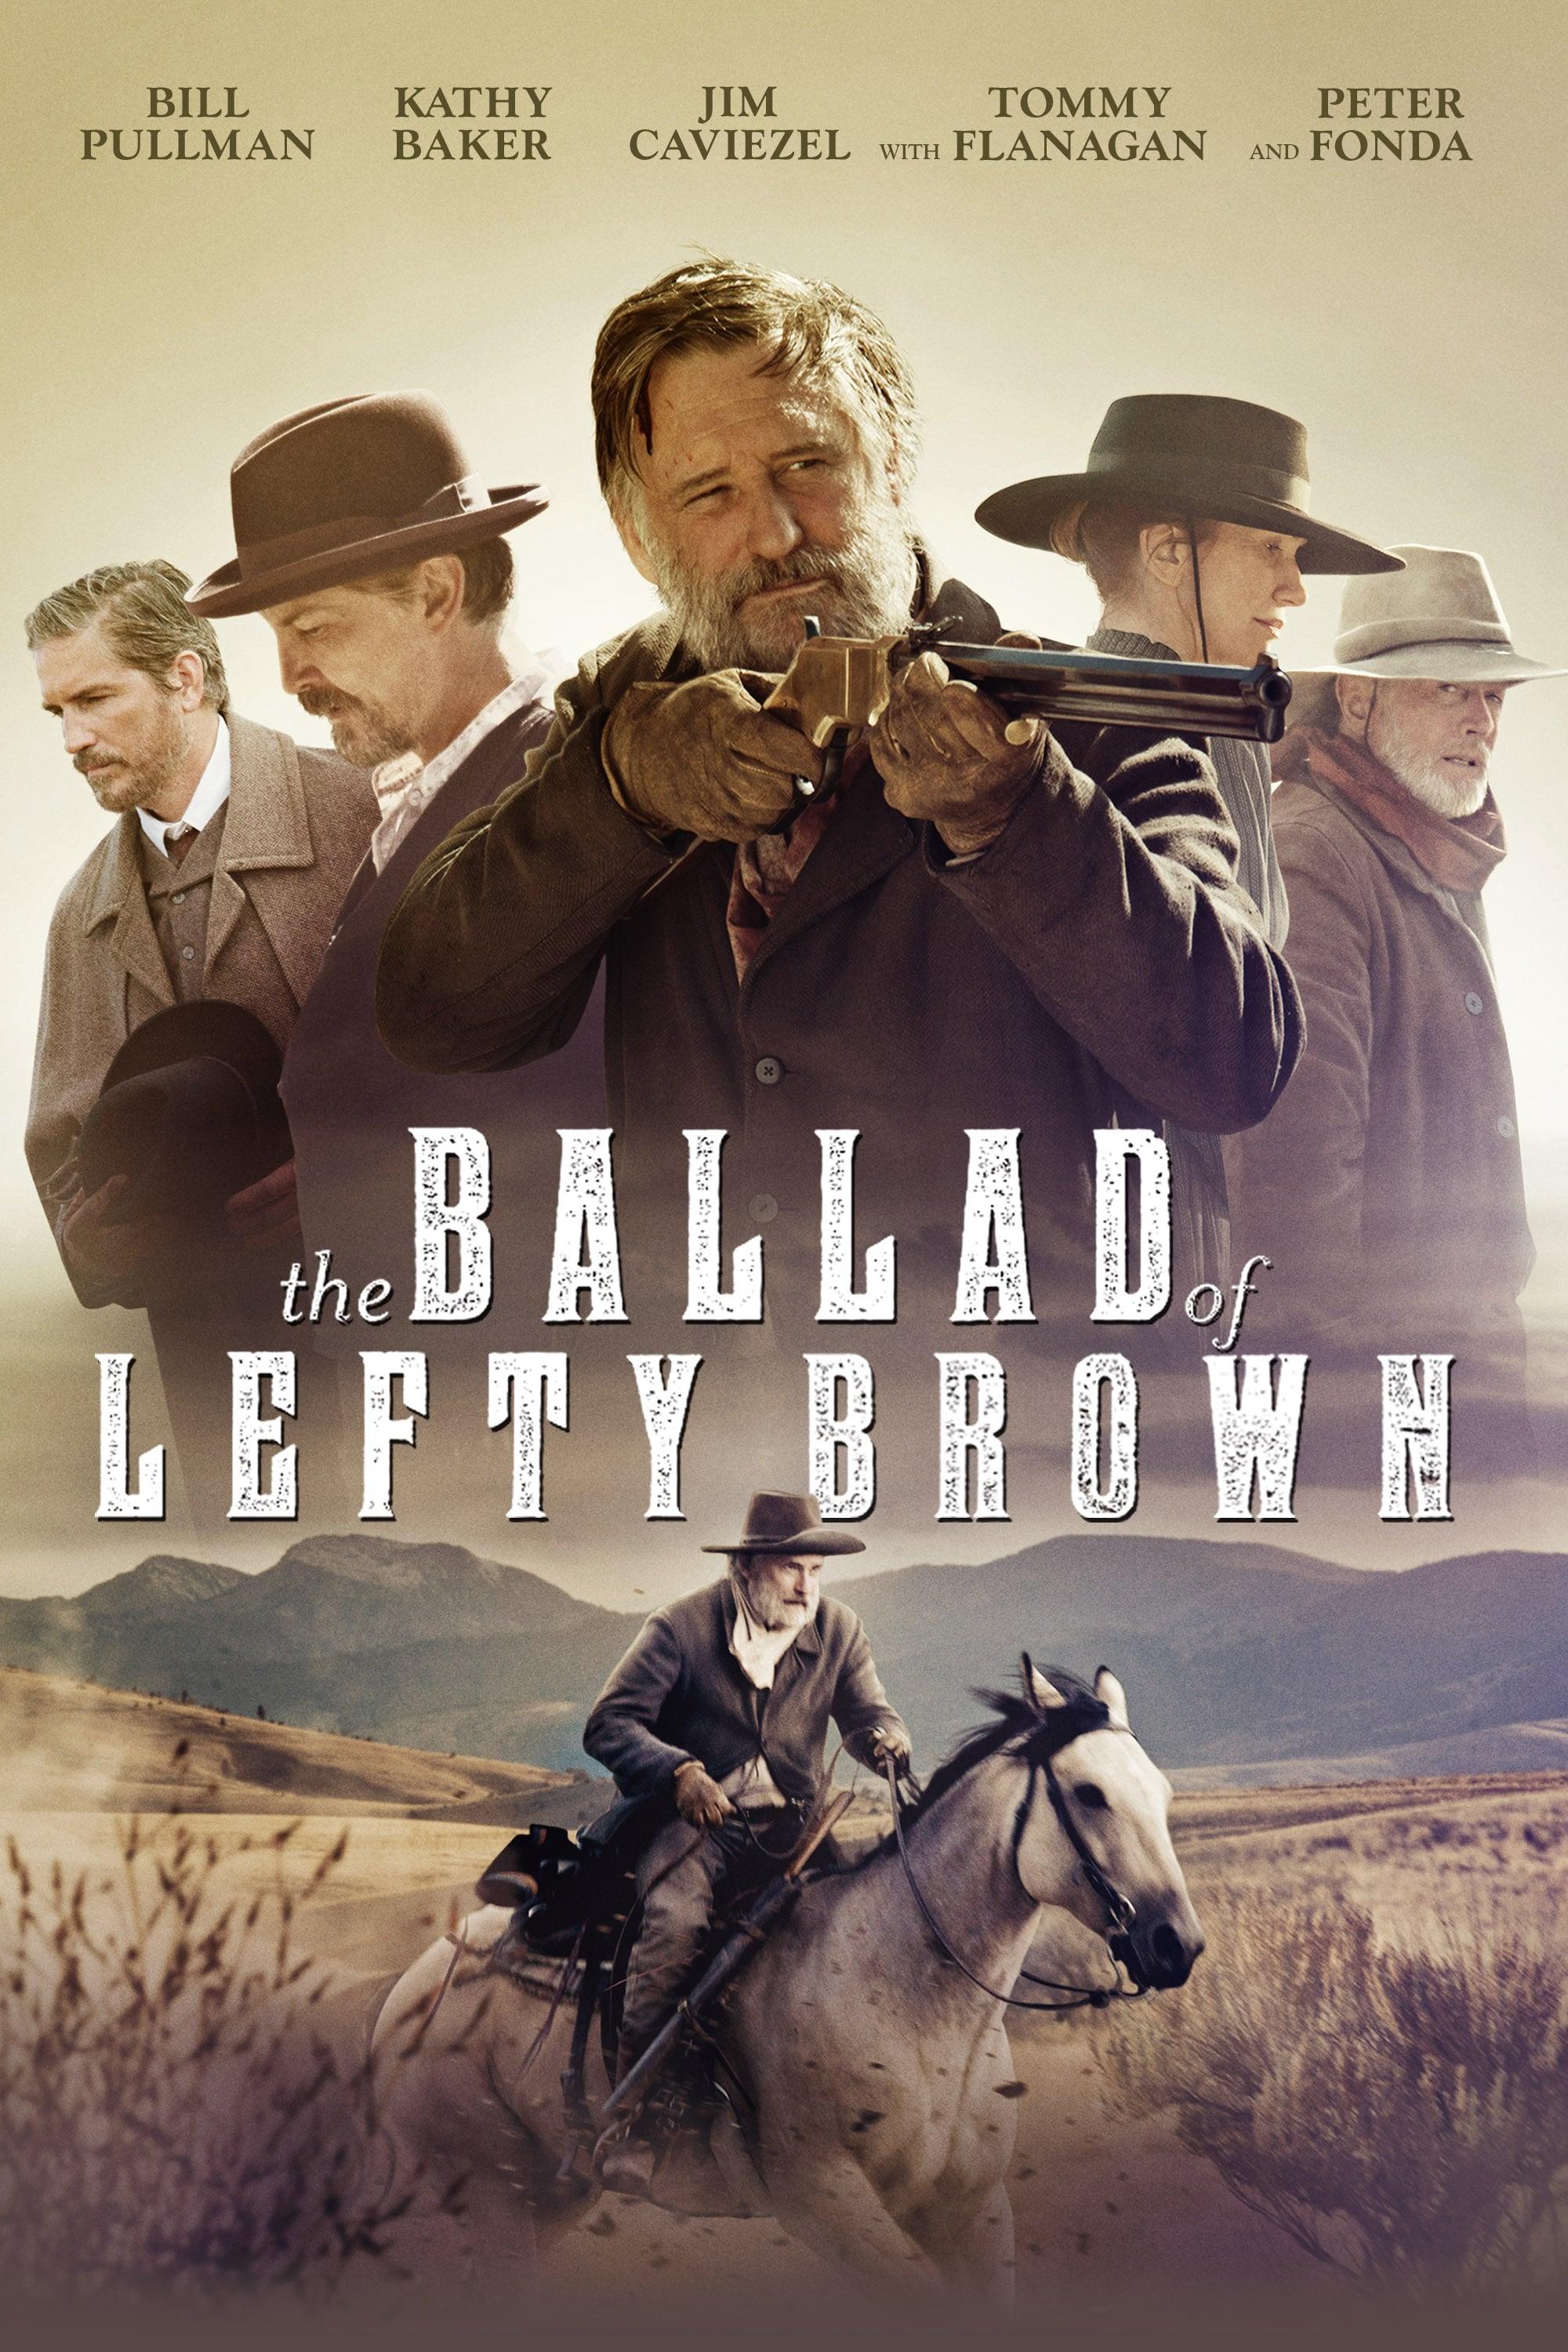 The Ballad of Lefty Brown poster